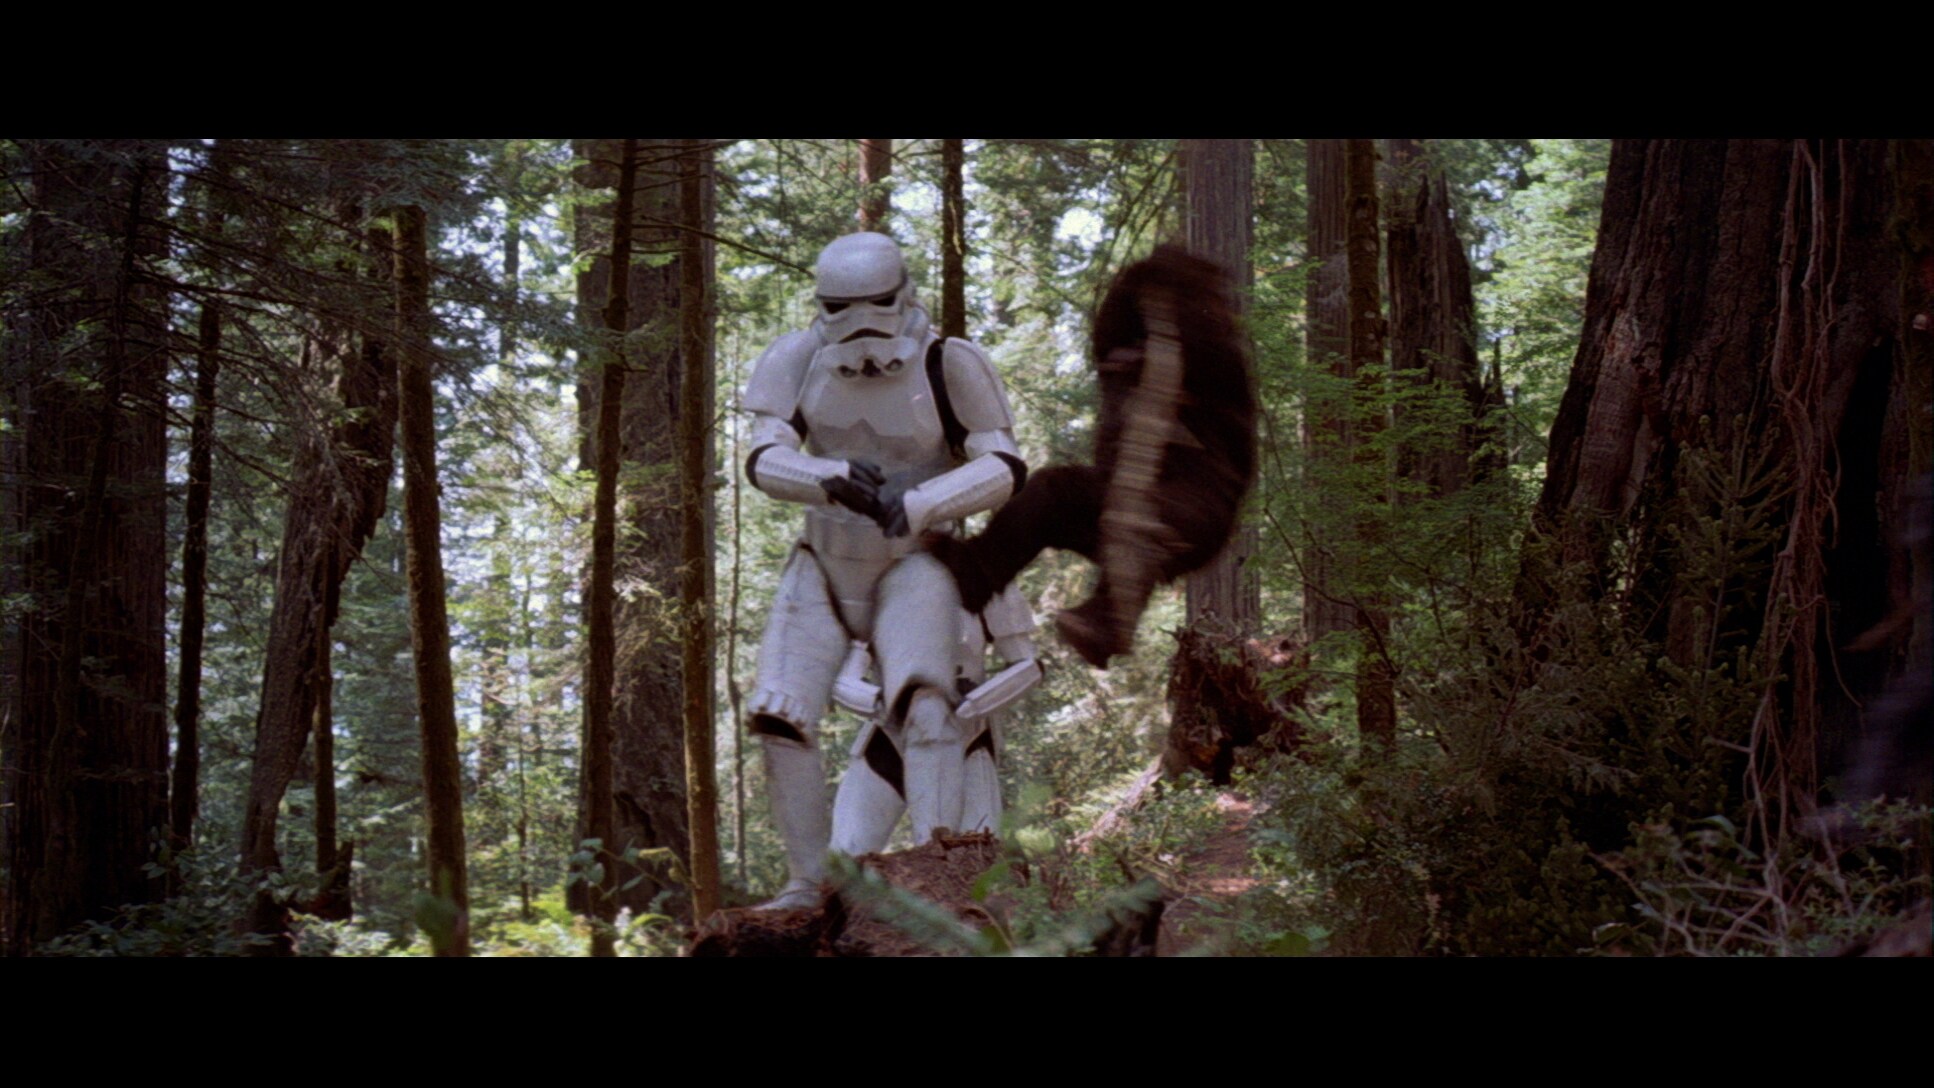 The stormtroopers considered the forest moon’s Ewoks of little consequence – how could diminutive...